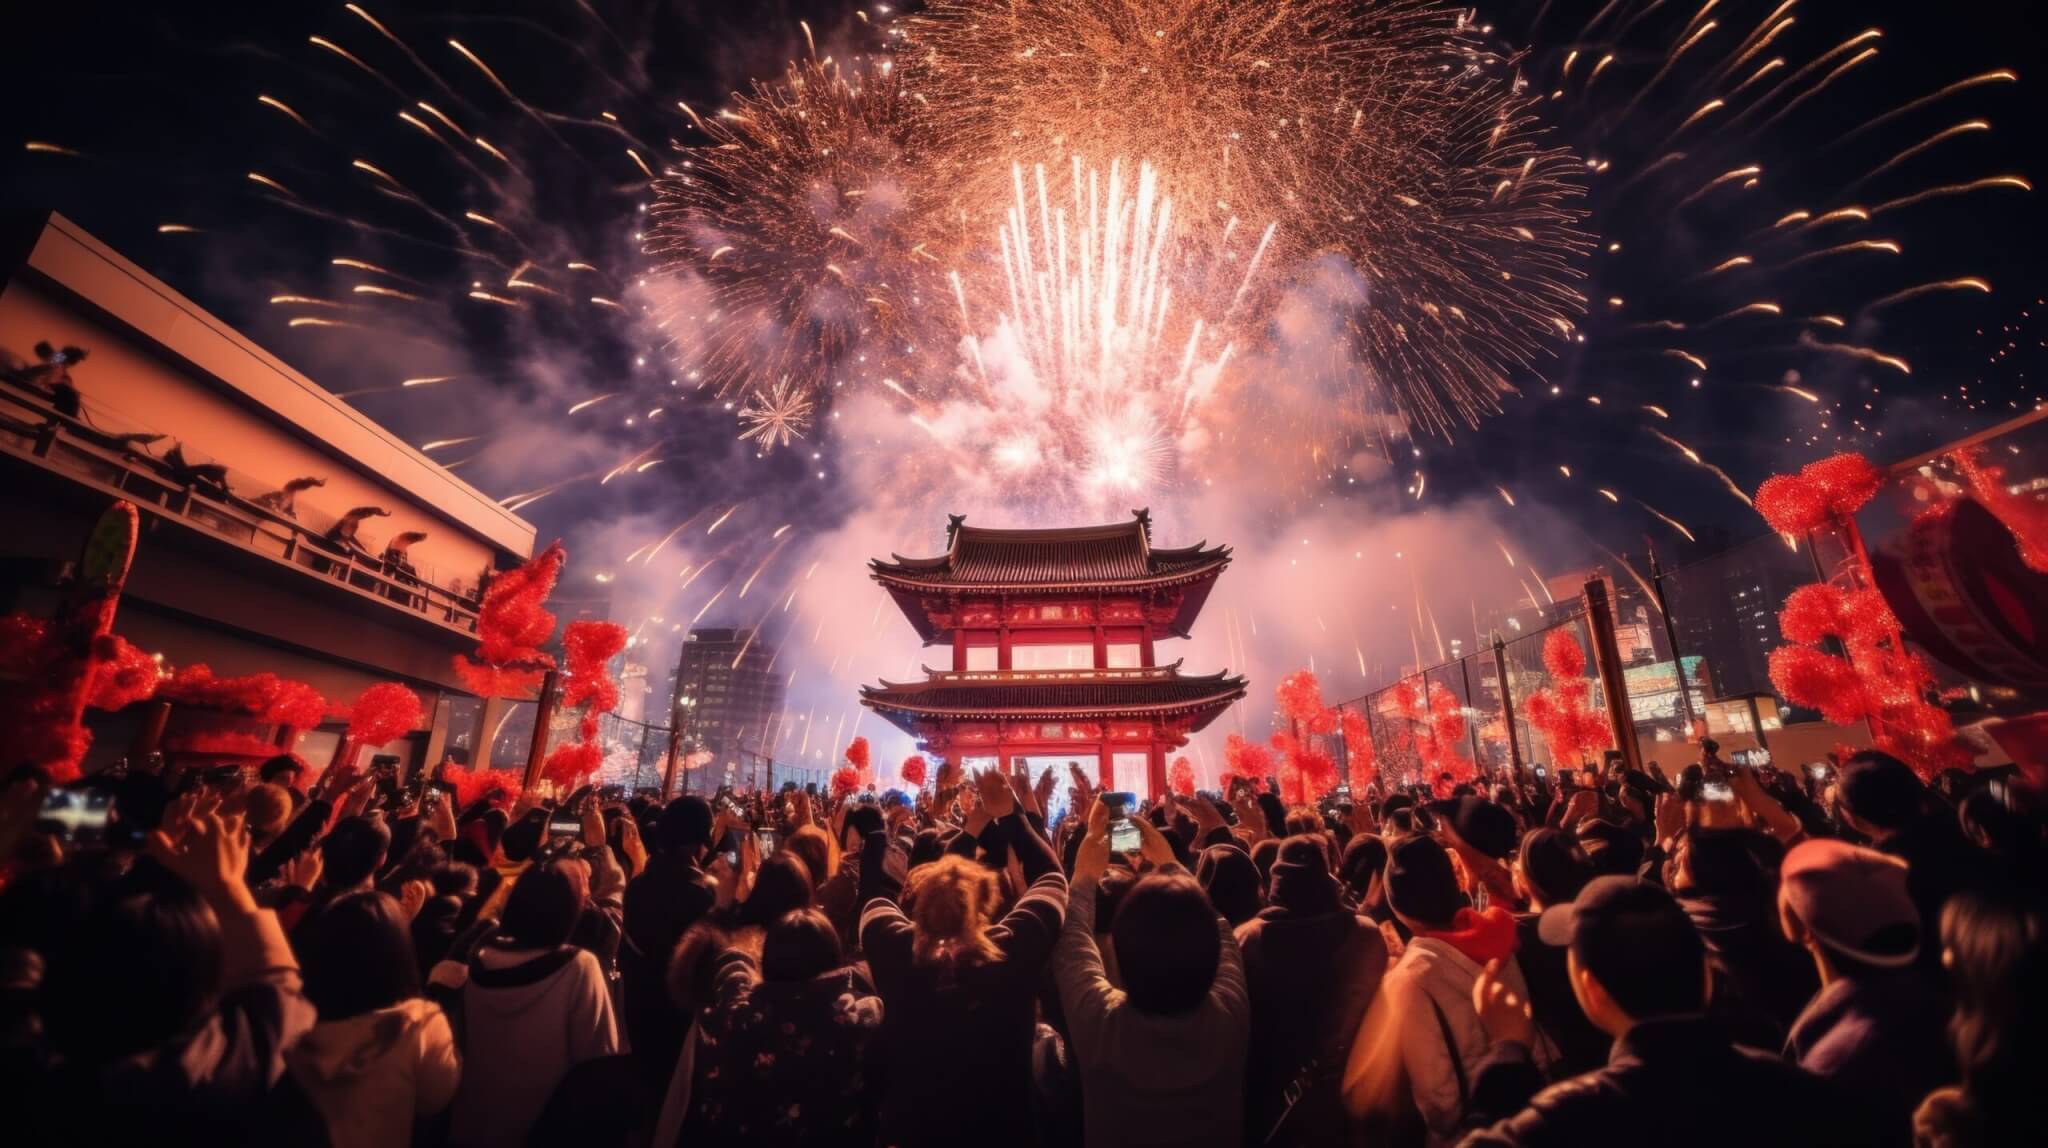 An image of people celebrating the new year in Japan